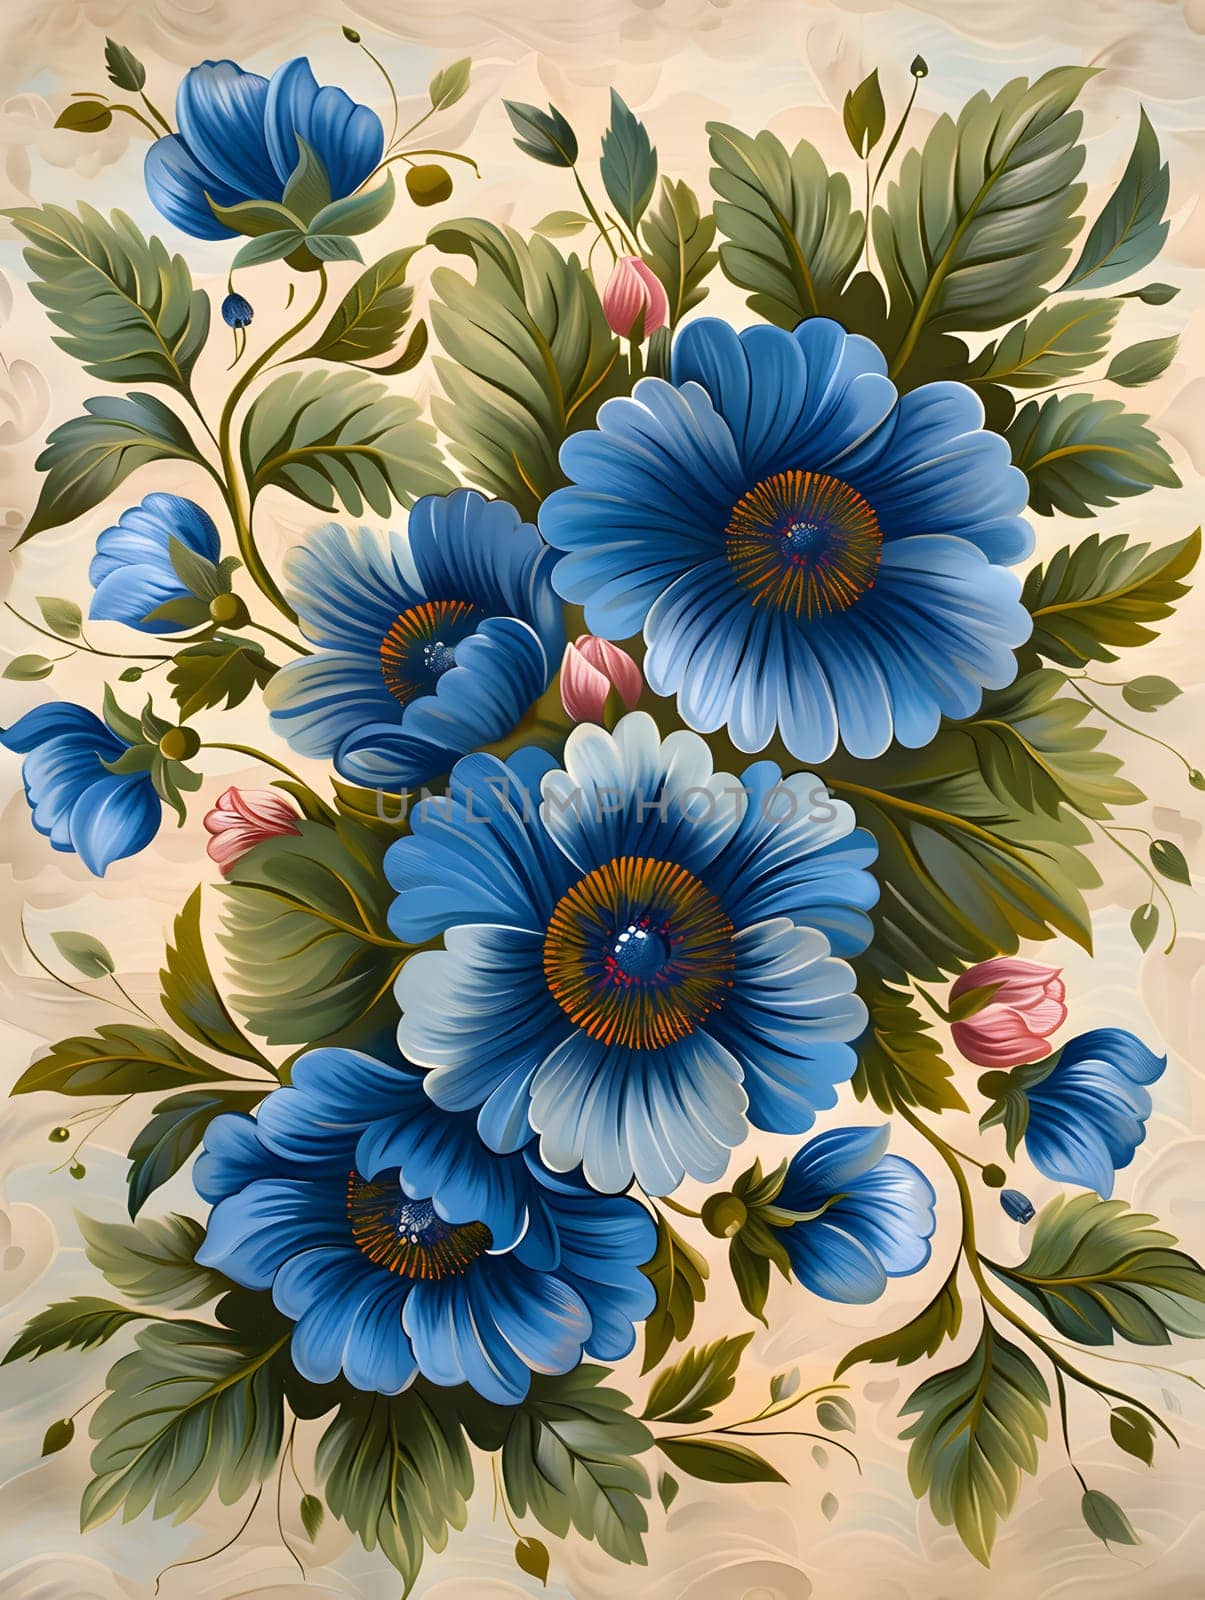 A creative arts piece featuring electric blue flowers with green leaves on a beige background. The artwork showcases the beauty of botany and the delicate petals of the flowers